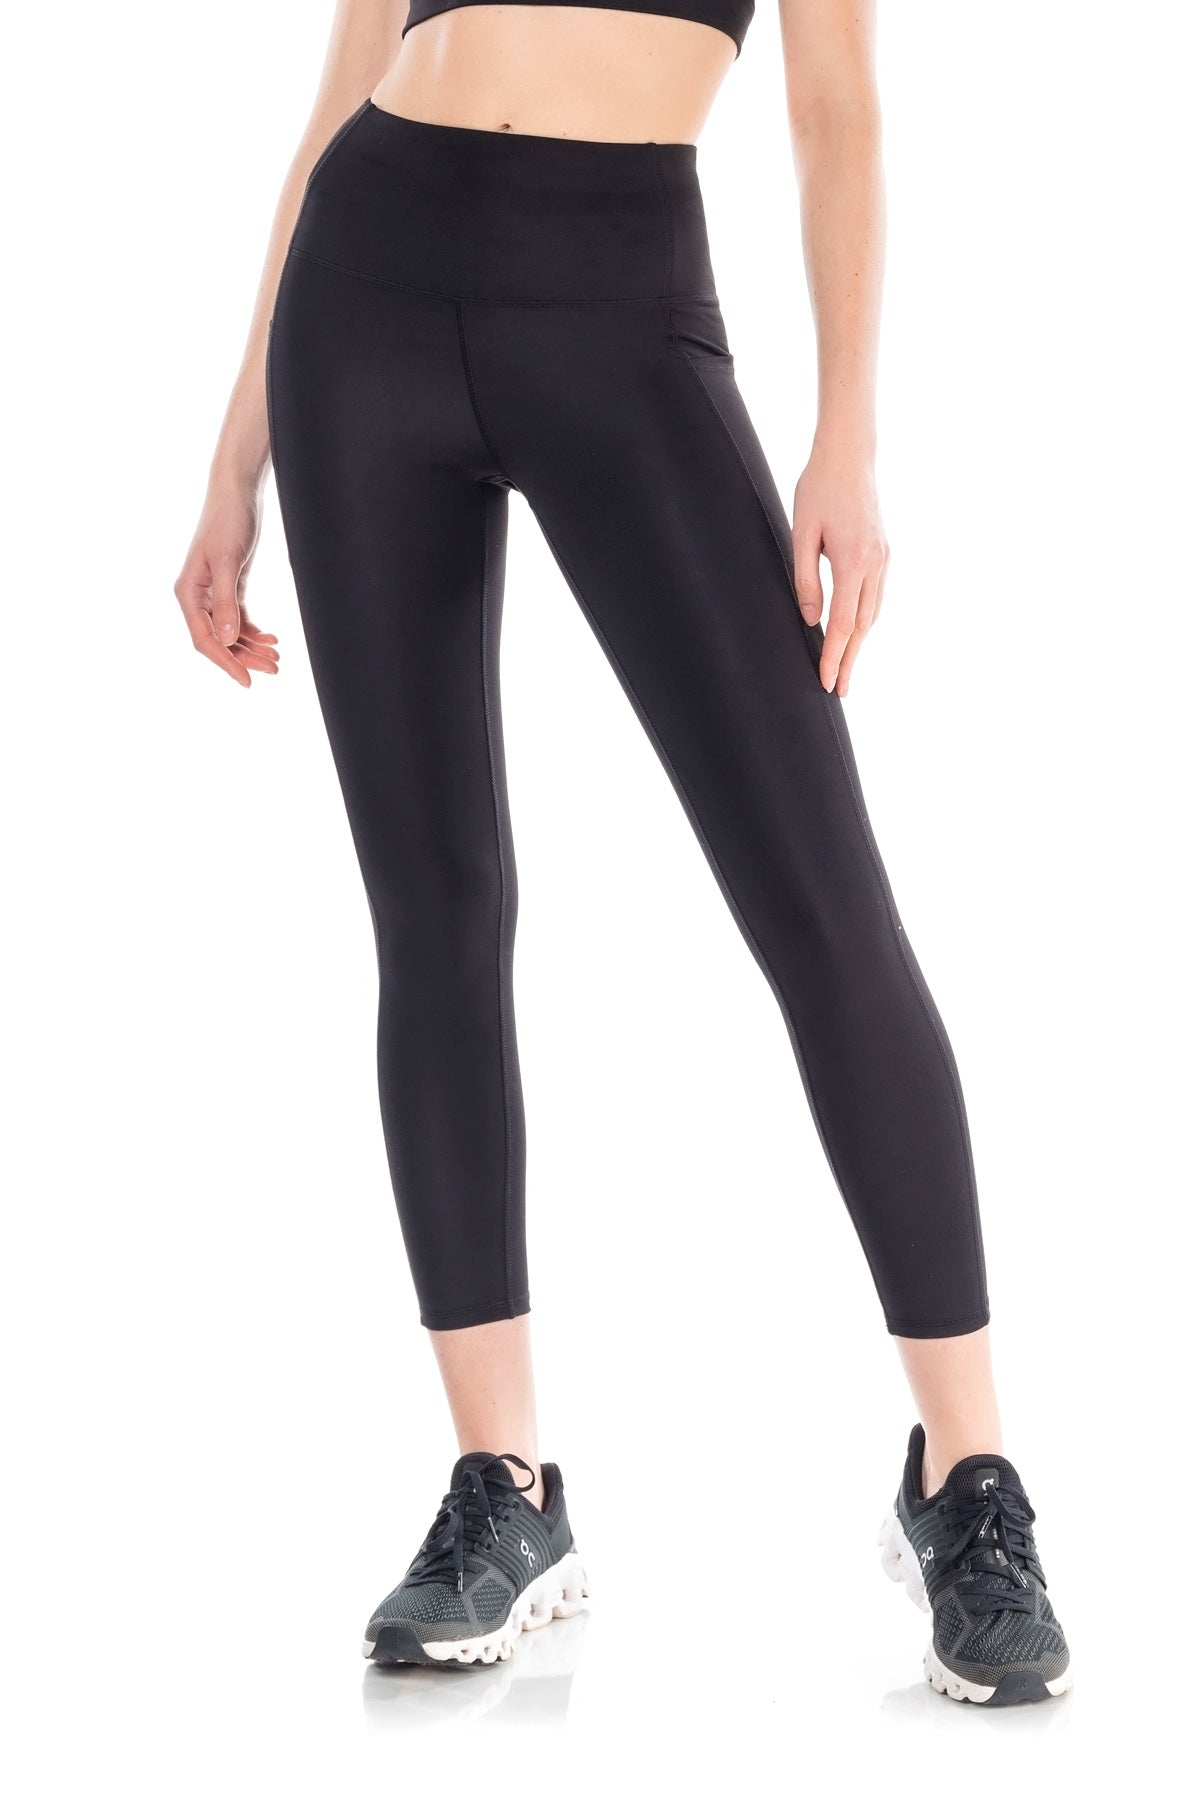 Yogalicious, Pants & Jumpsuits, Yogalicious High Waist Ultra Soft Ankle  Length Leggings With Pockets